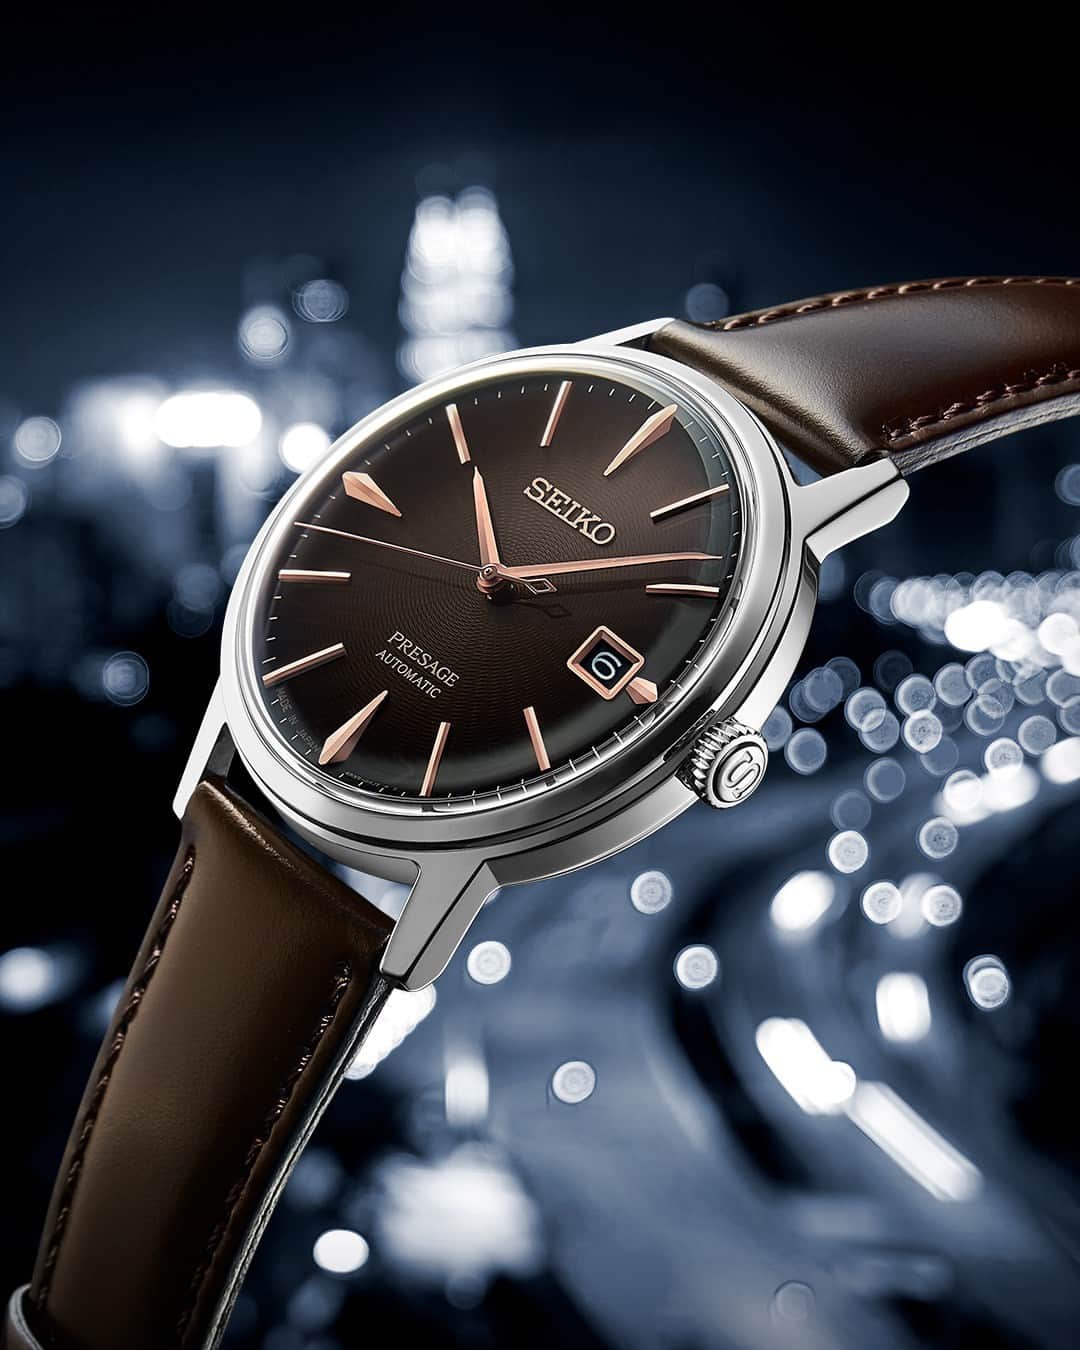 Seiko Watchesのインスタグラム：「Coffee Time? ☕ - Seiko Presage Cocktail Time takes your look from day to night with its Tokyo cocktail lounge-inspired style. #SRPJ17 eases us into the weekend with its gradated gray/brown dial inspired by the Irish Coffee cocktail. Cheers to you and your new Seiko timepiece!   #Seiko #Presage」